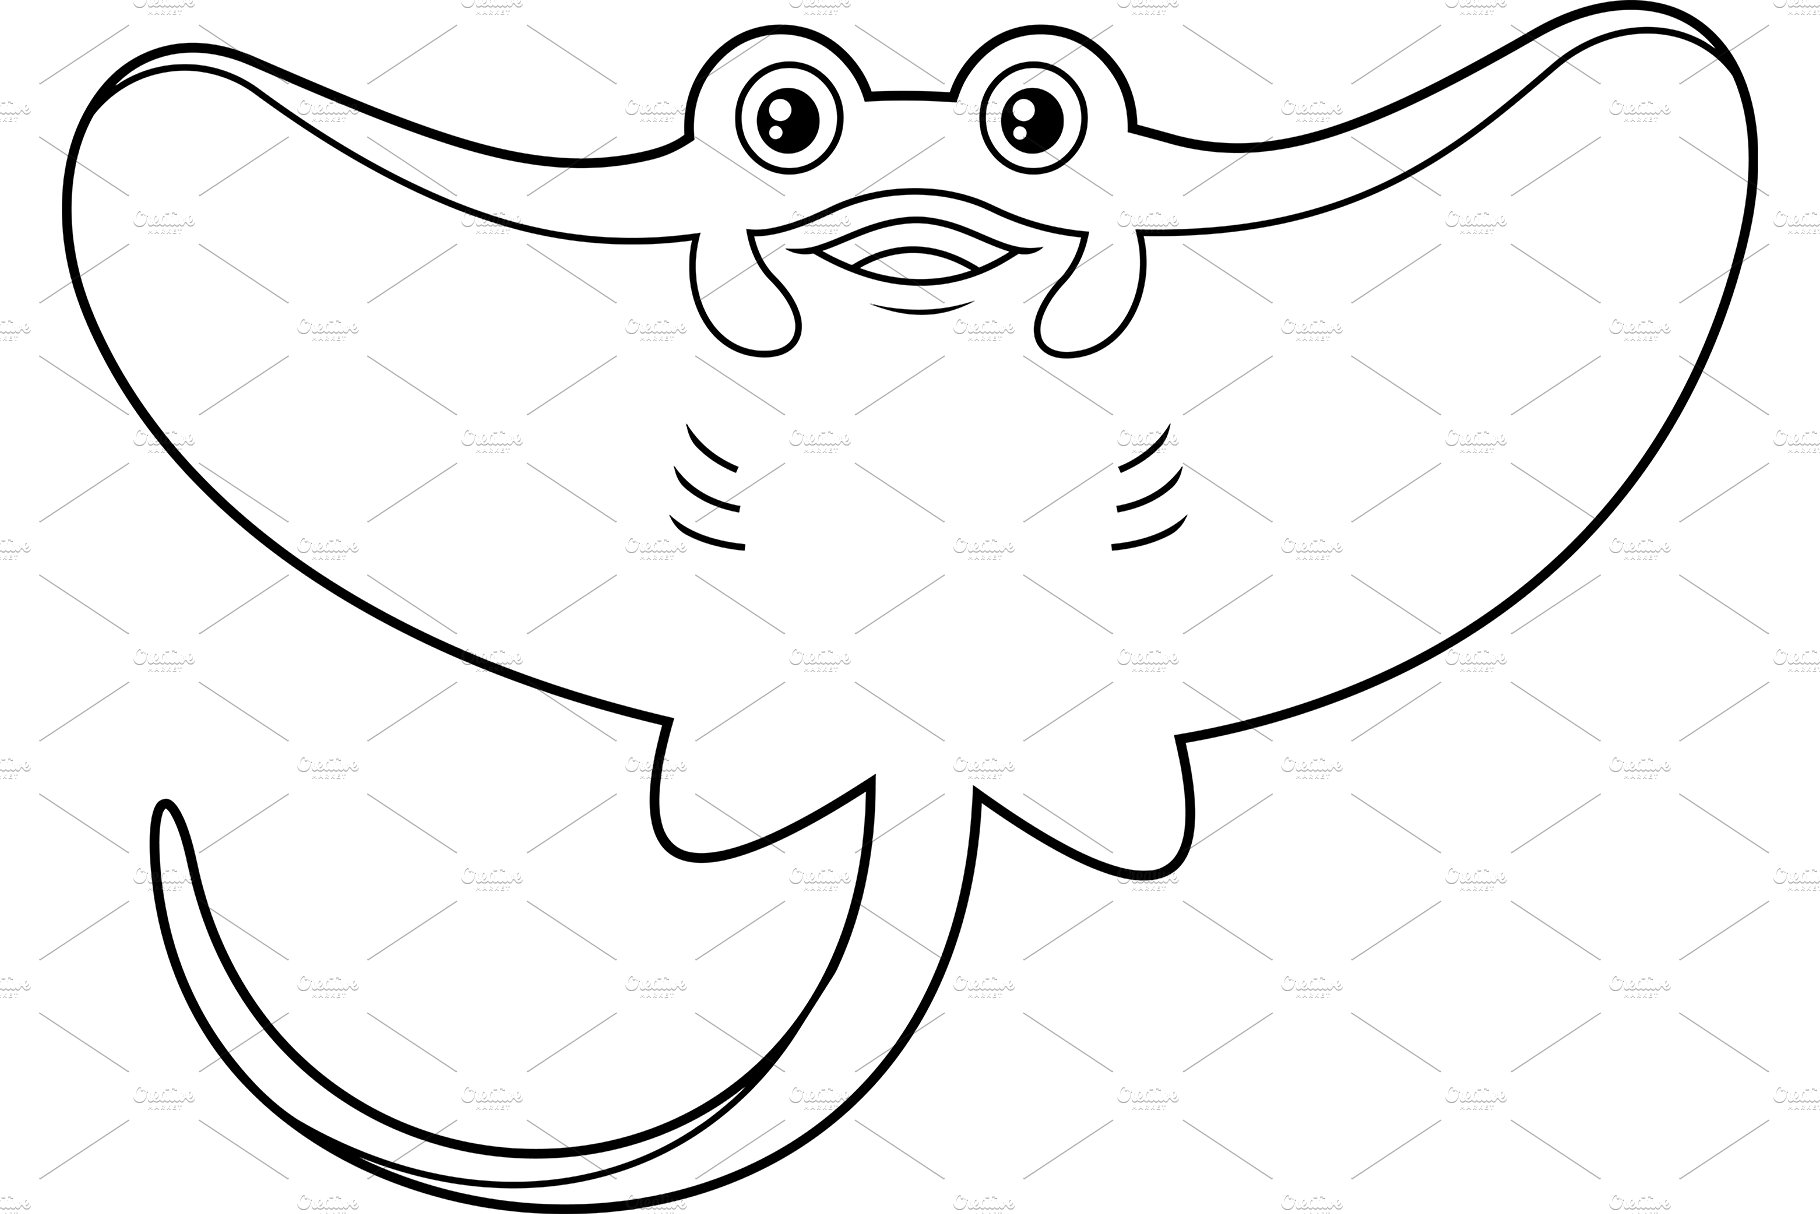 Outlined Cute Stingray Fish cover image.